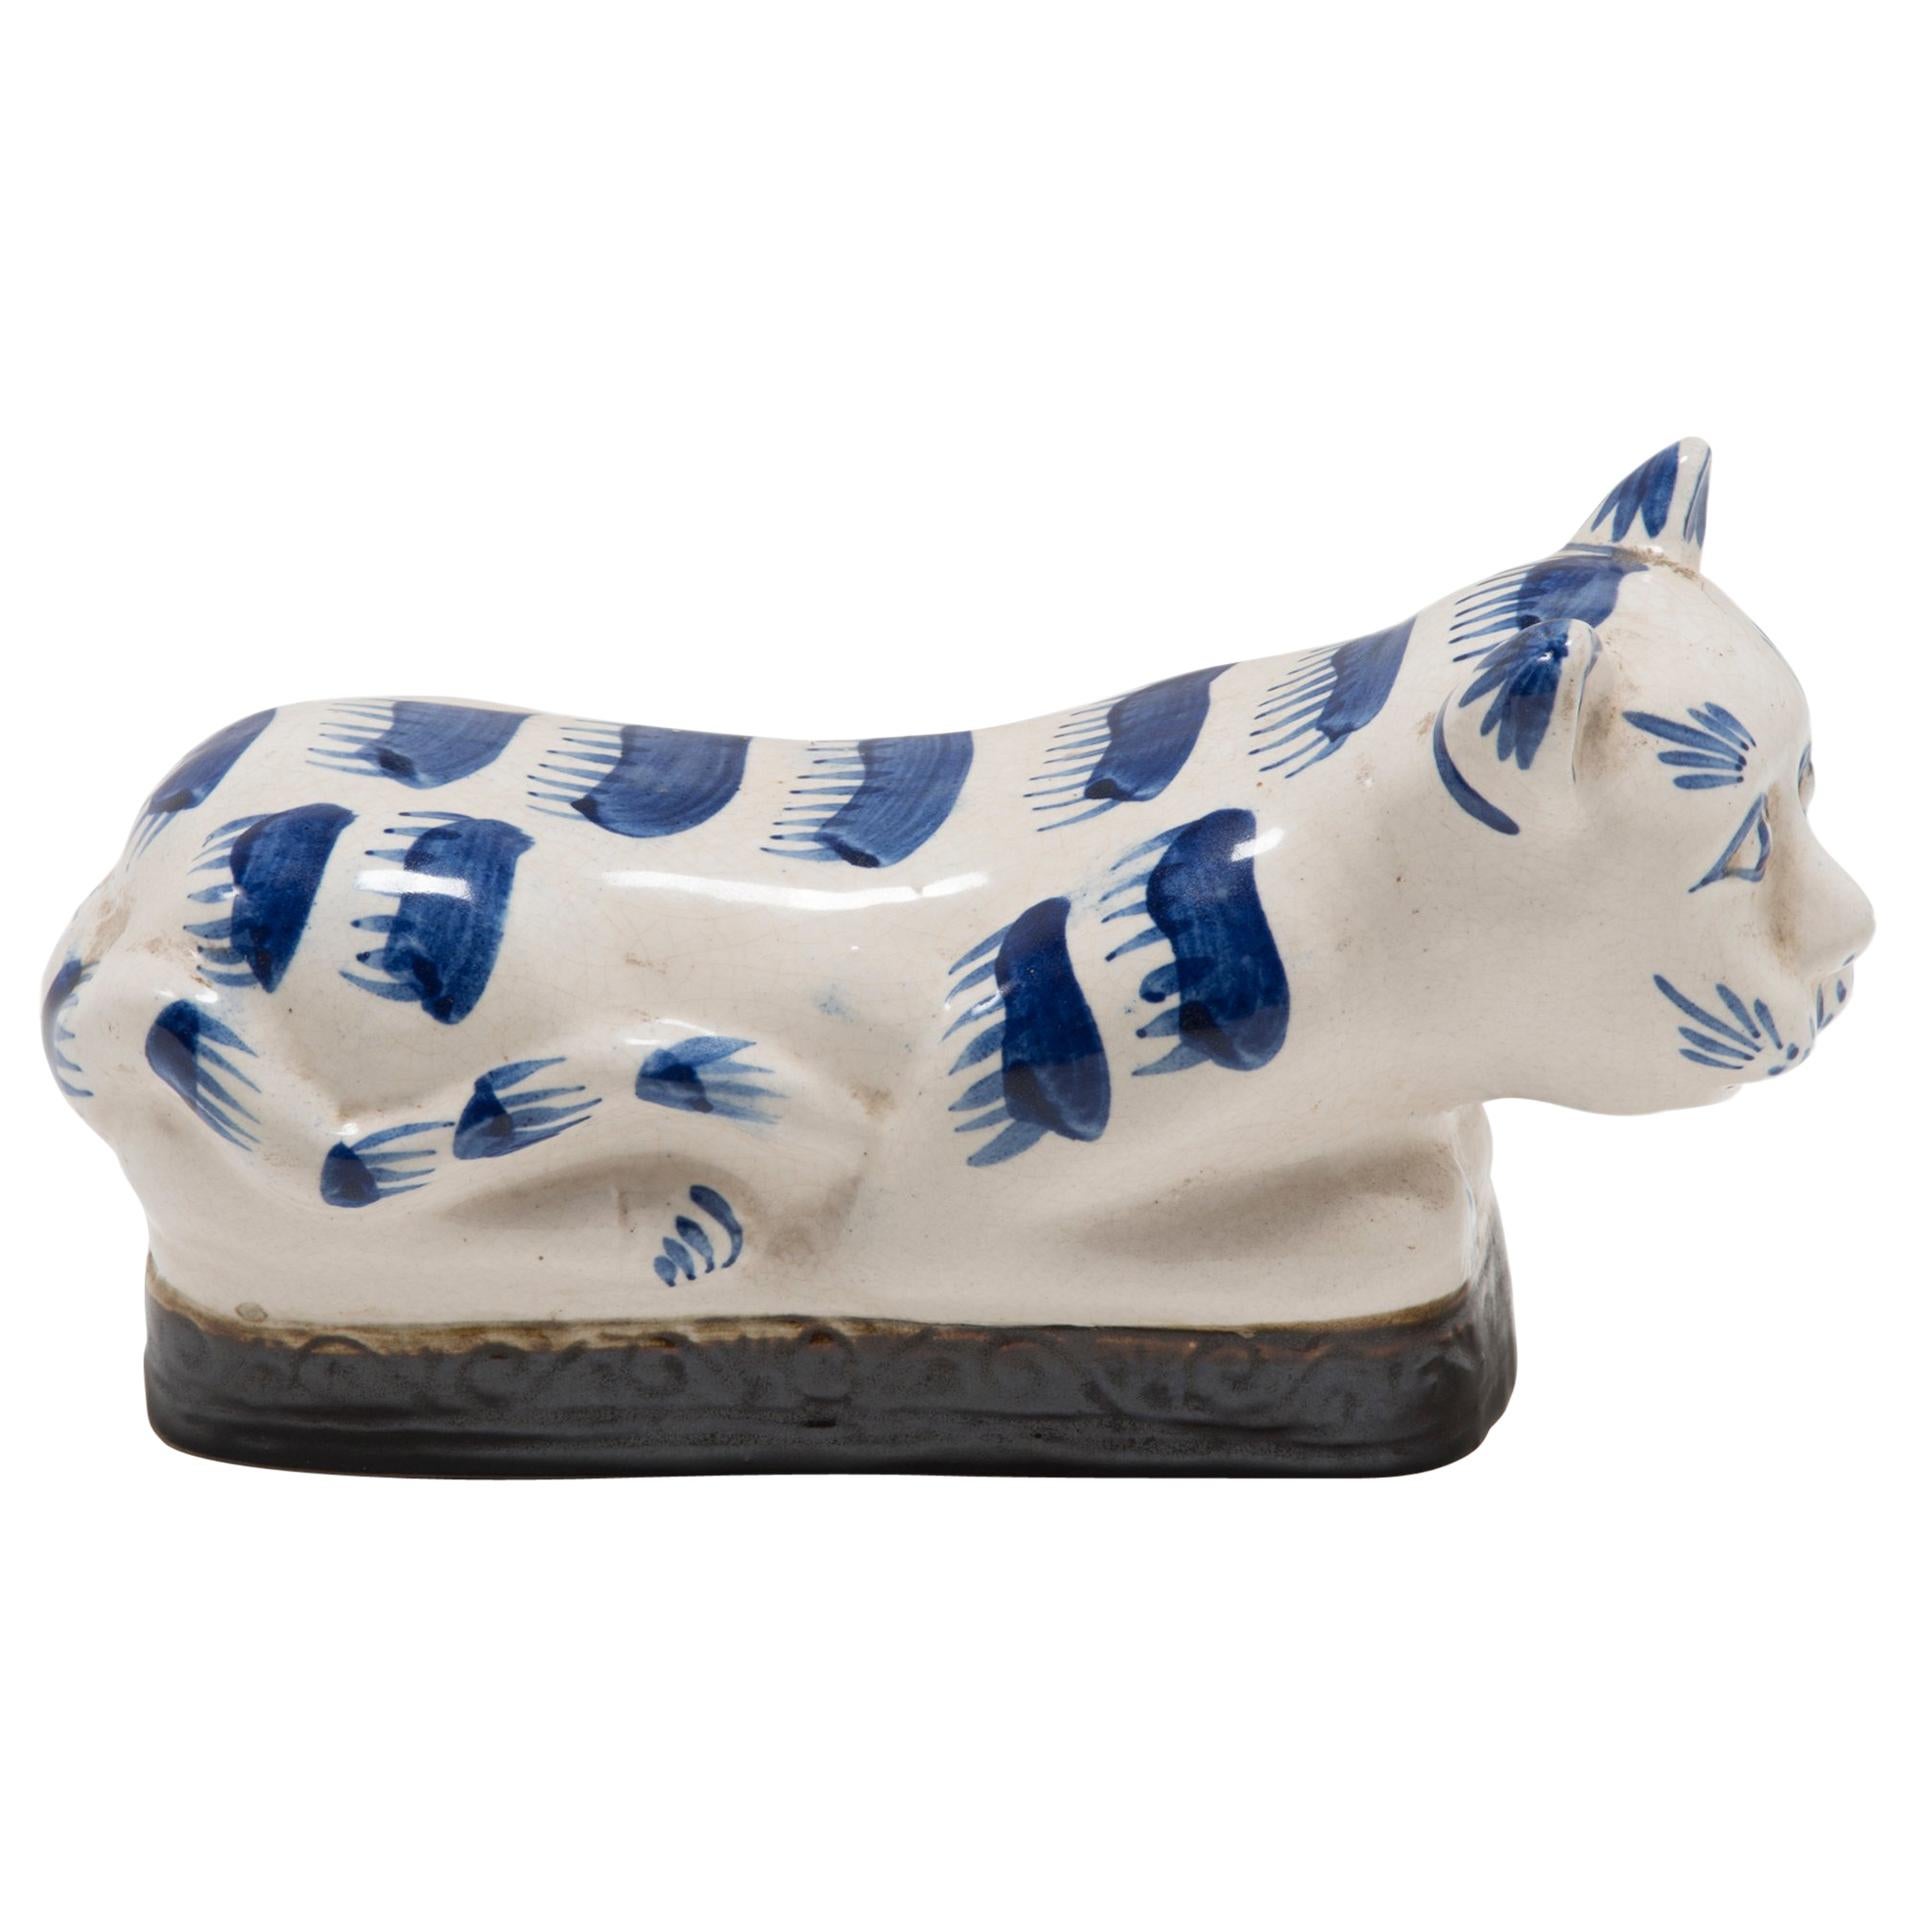 Chinese Blue and White Cat Headrest, c. 1900